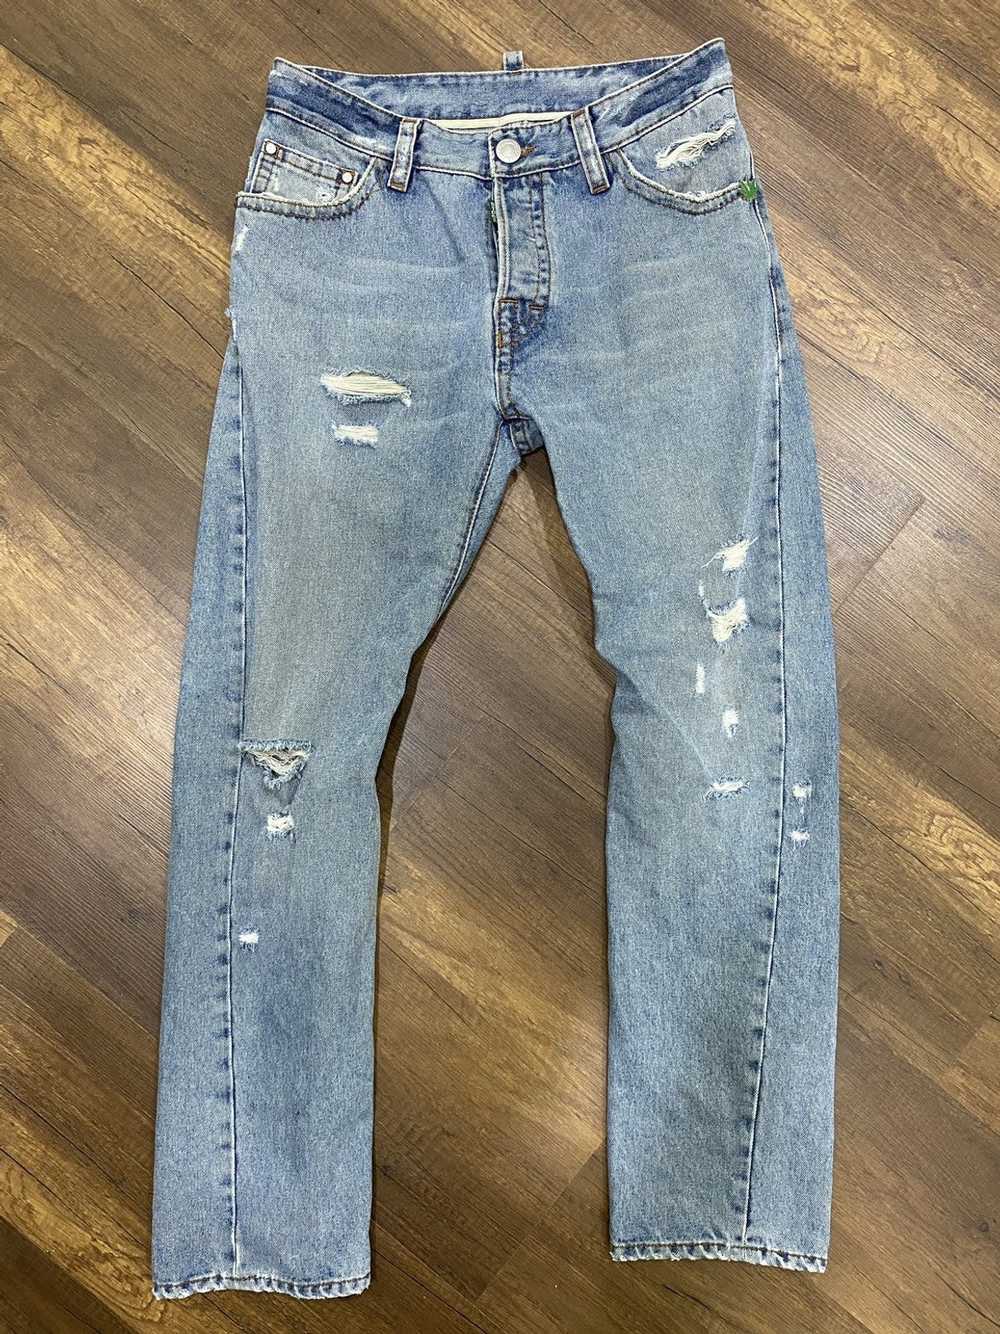 Dsquared2 Dsquared2 Italy Denim Distressed Style - image 1